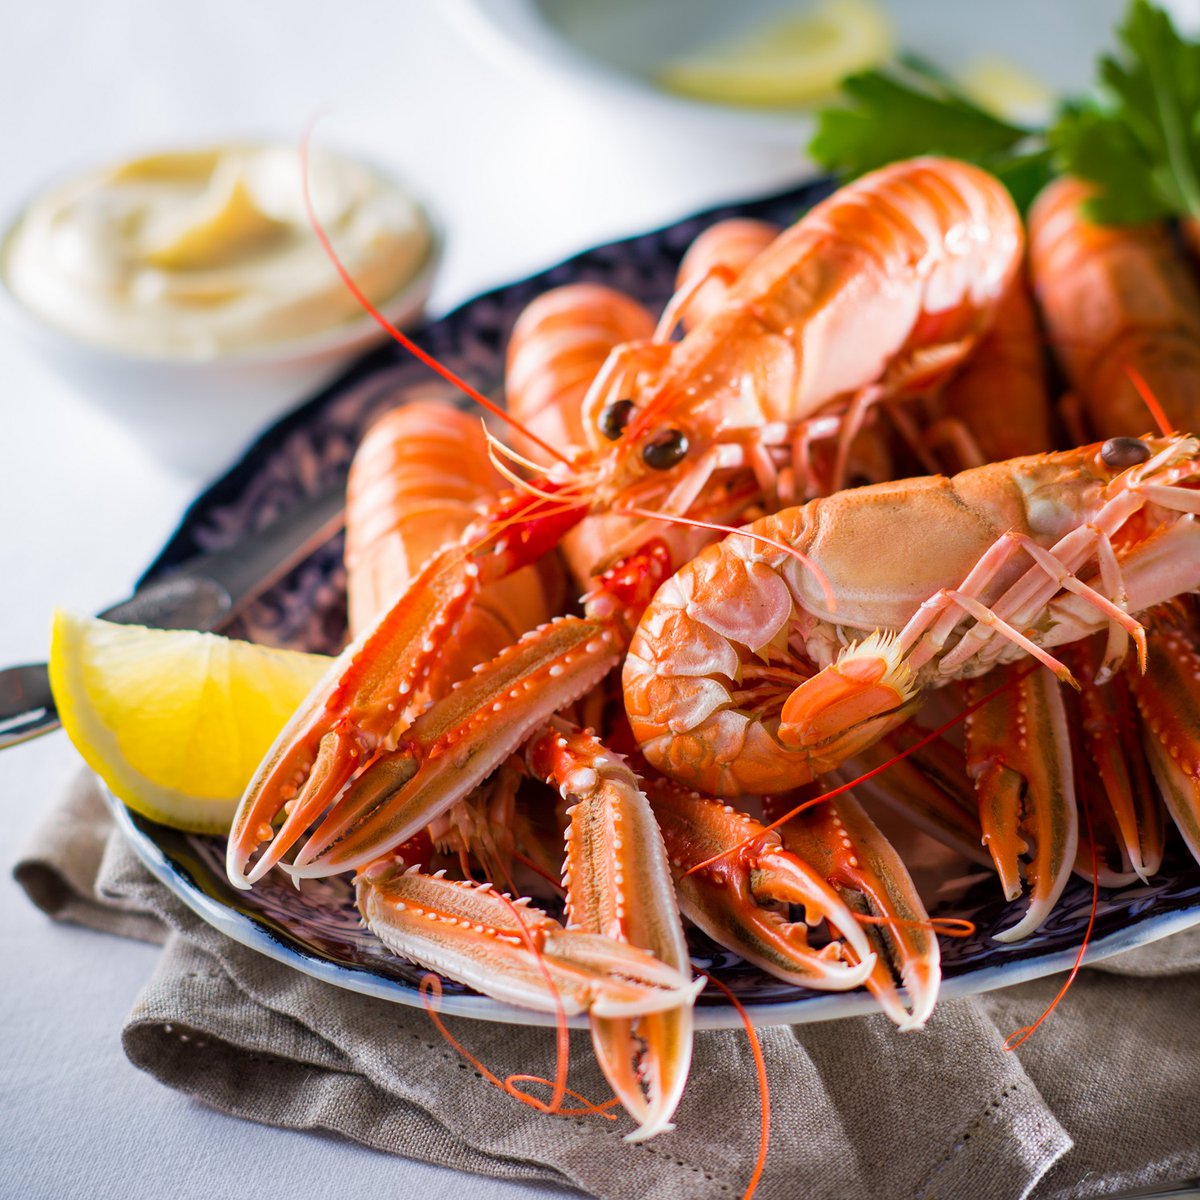 Inshore Scottish waters provide the perfect environment for #langoustine to thrive! With a soft, meaty texture these versatile shellfish cook in minutes and are packed full of nutrients harvested from Scotland's mineral-rich waters.